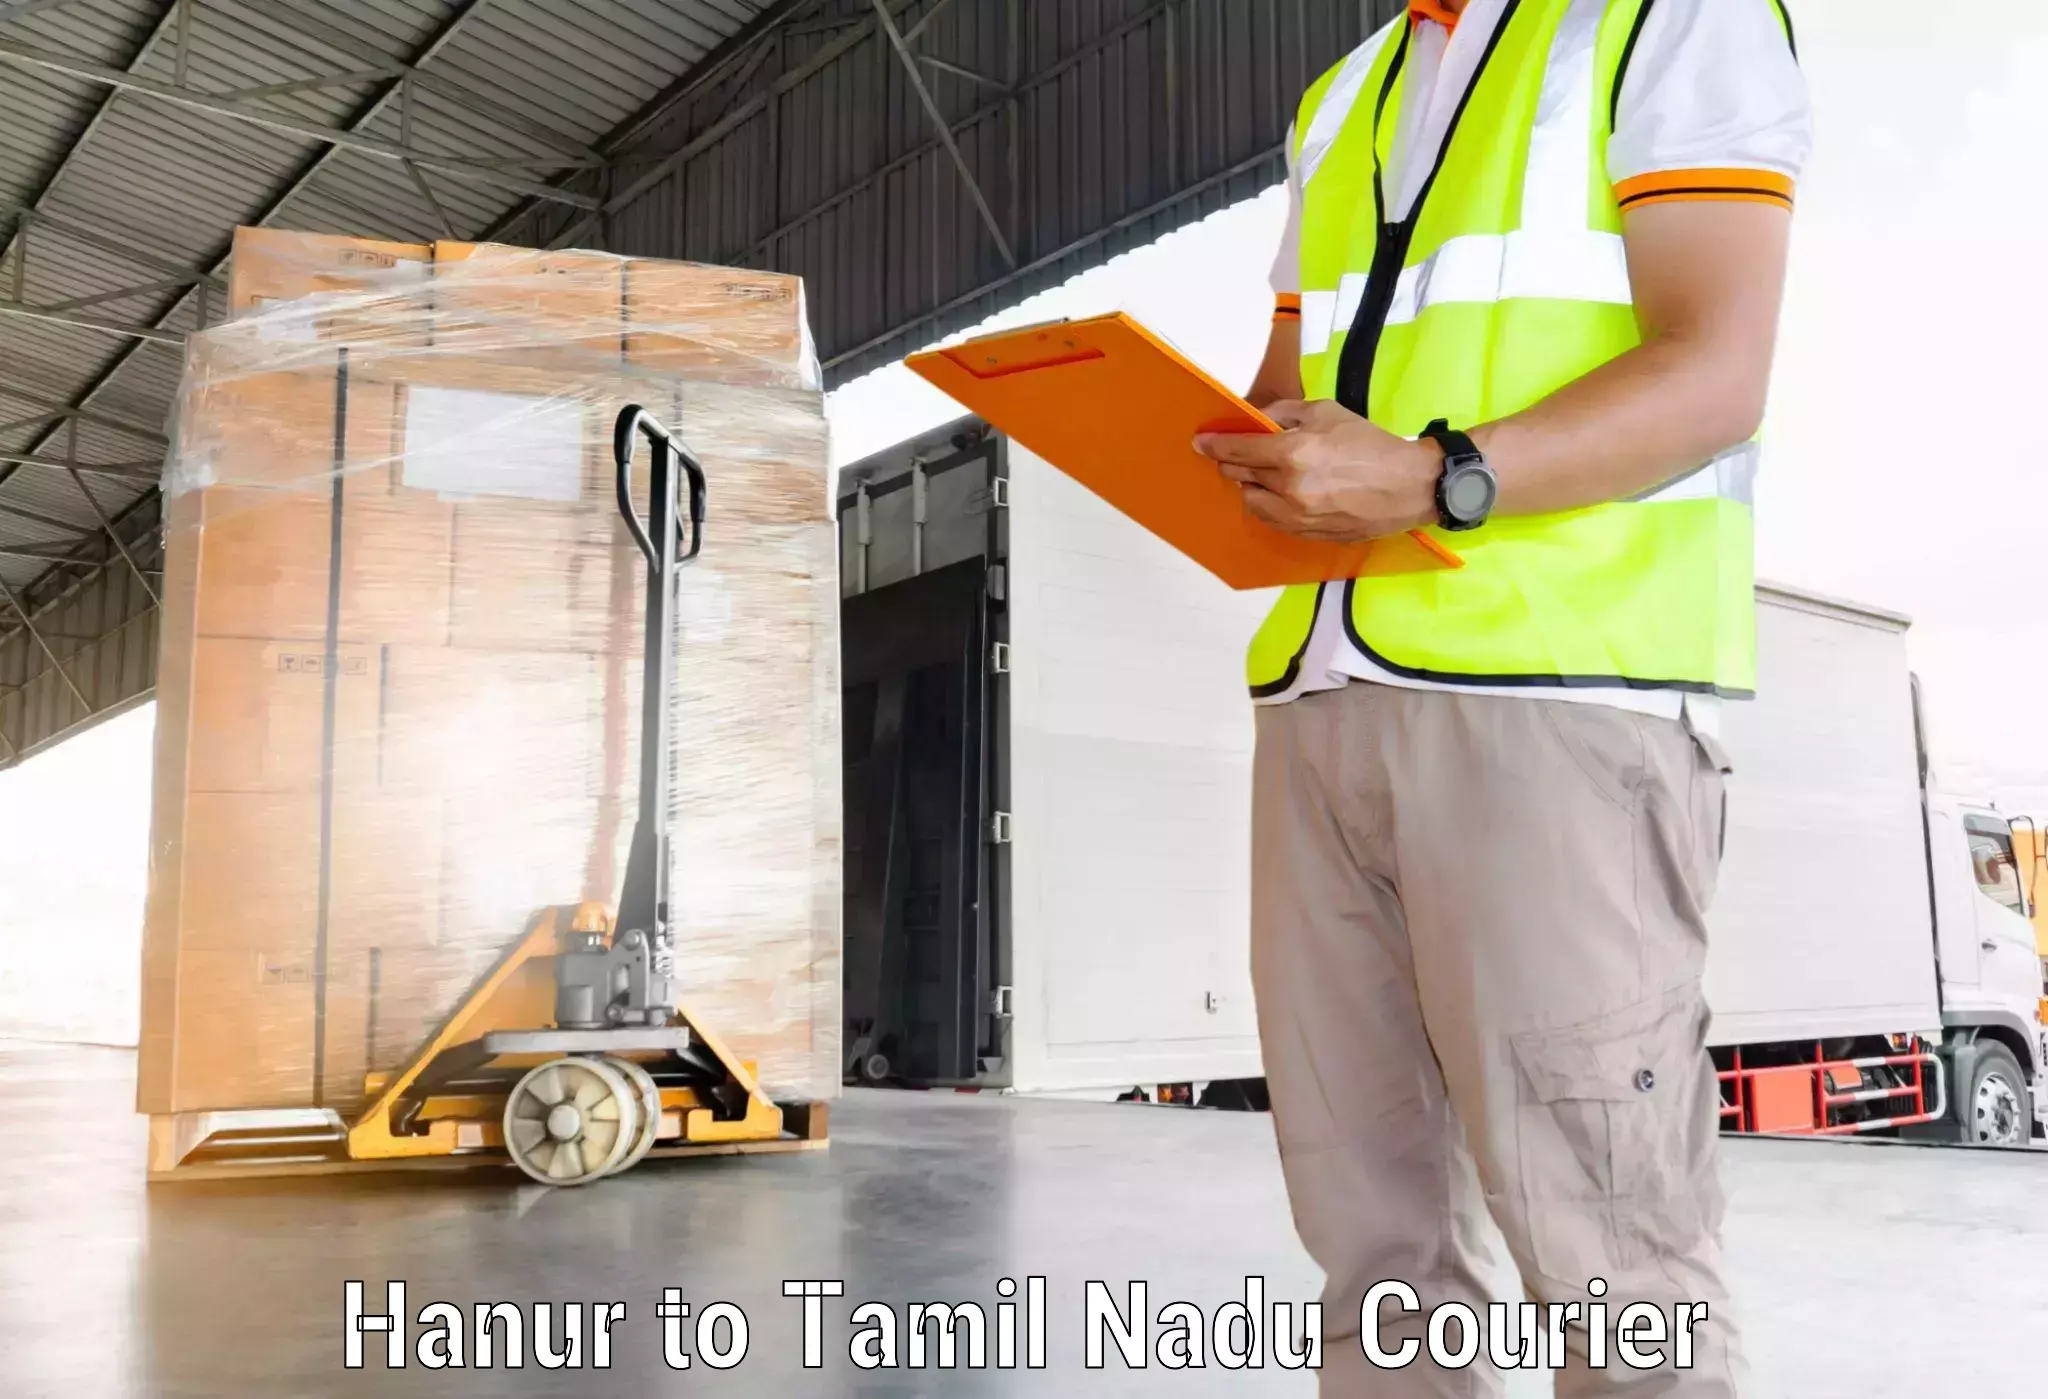 Enhanced tracking features in Hanur to Tindivanam